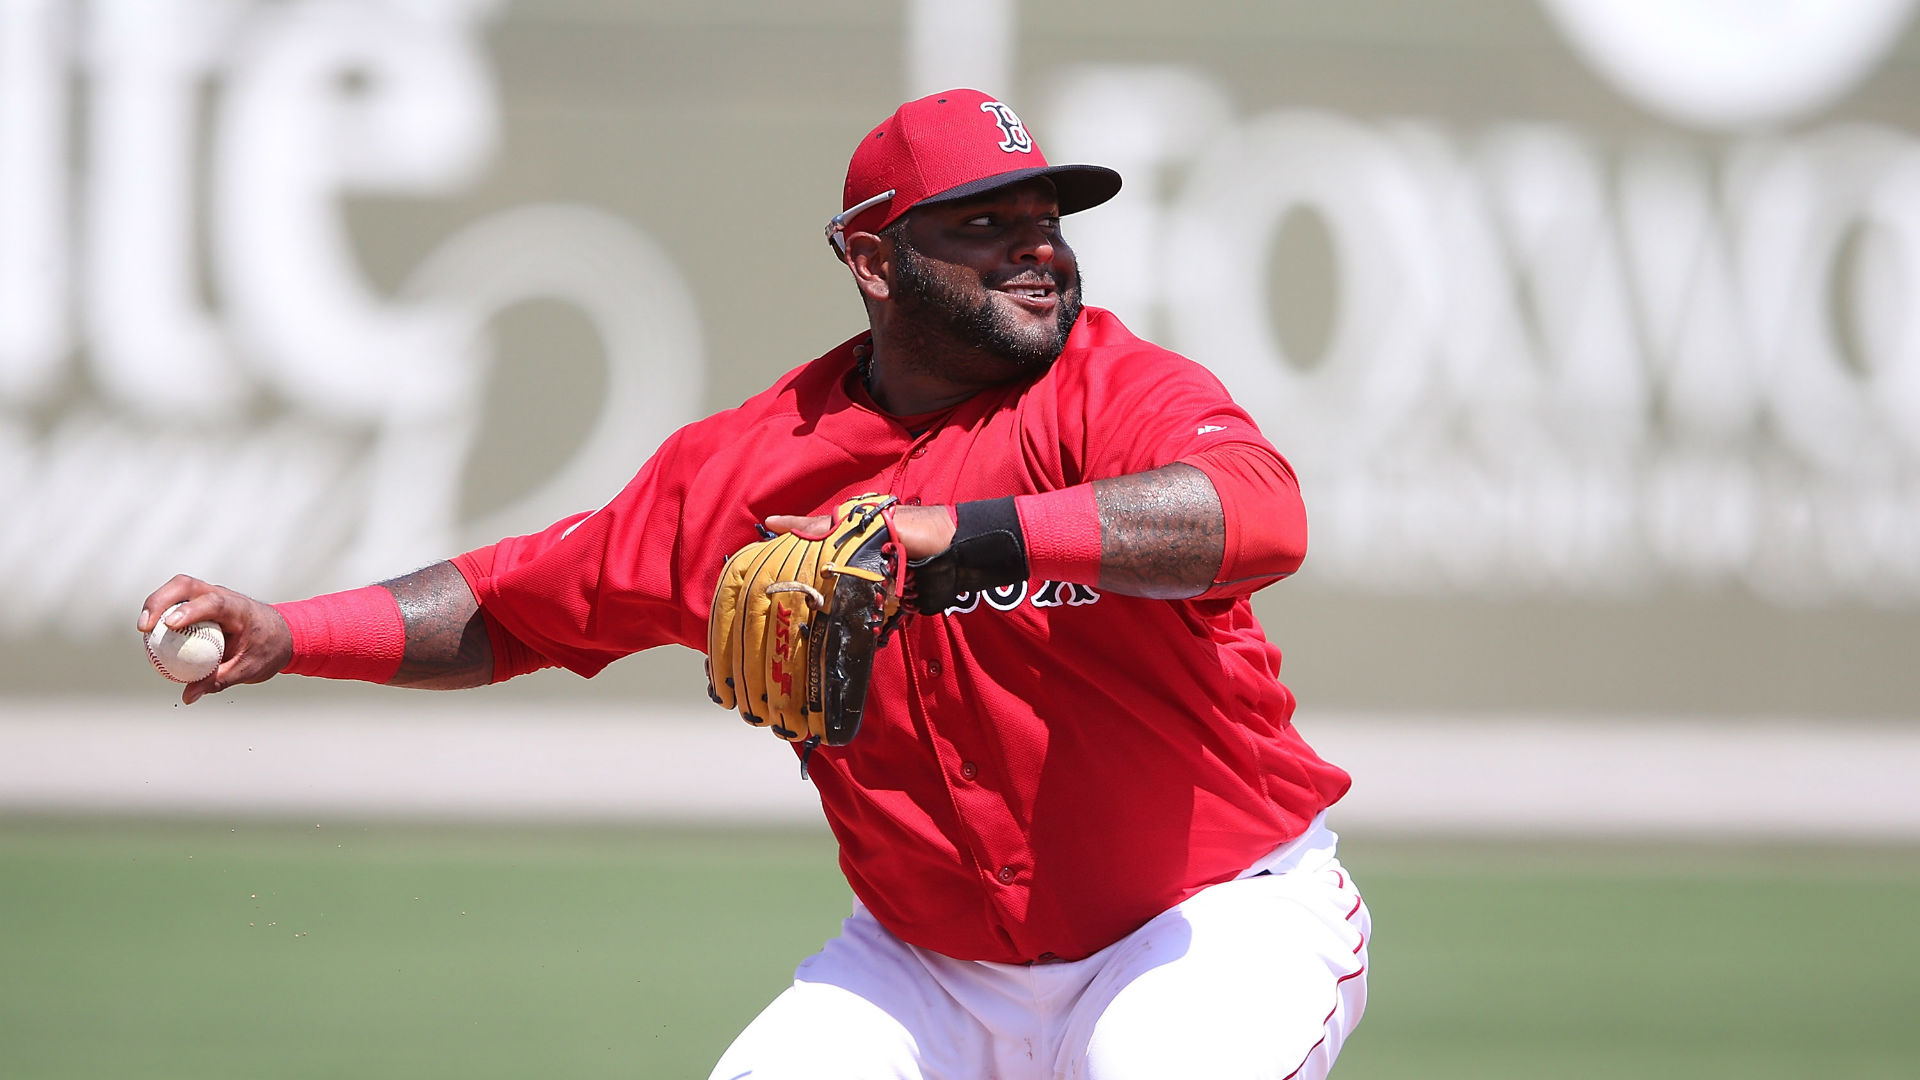 Pablo Sandoval Gets 17 million to Ride Red Sox Bench